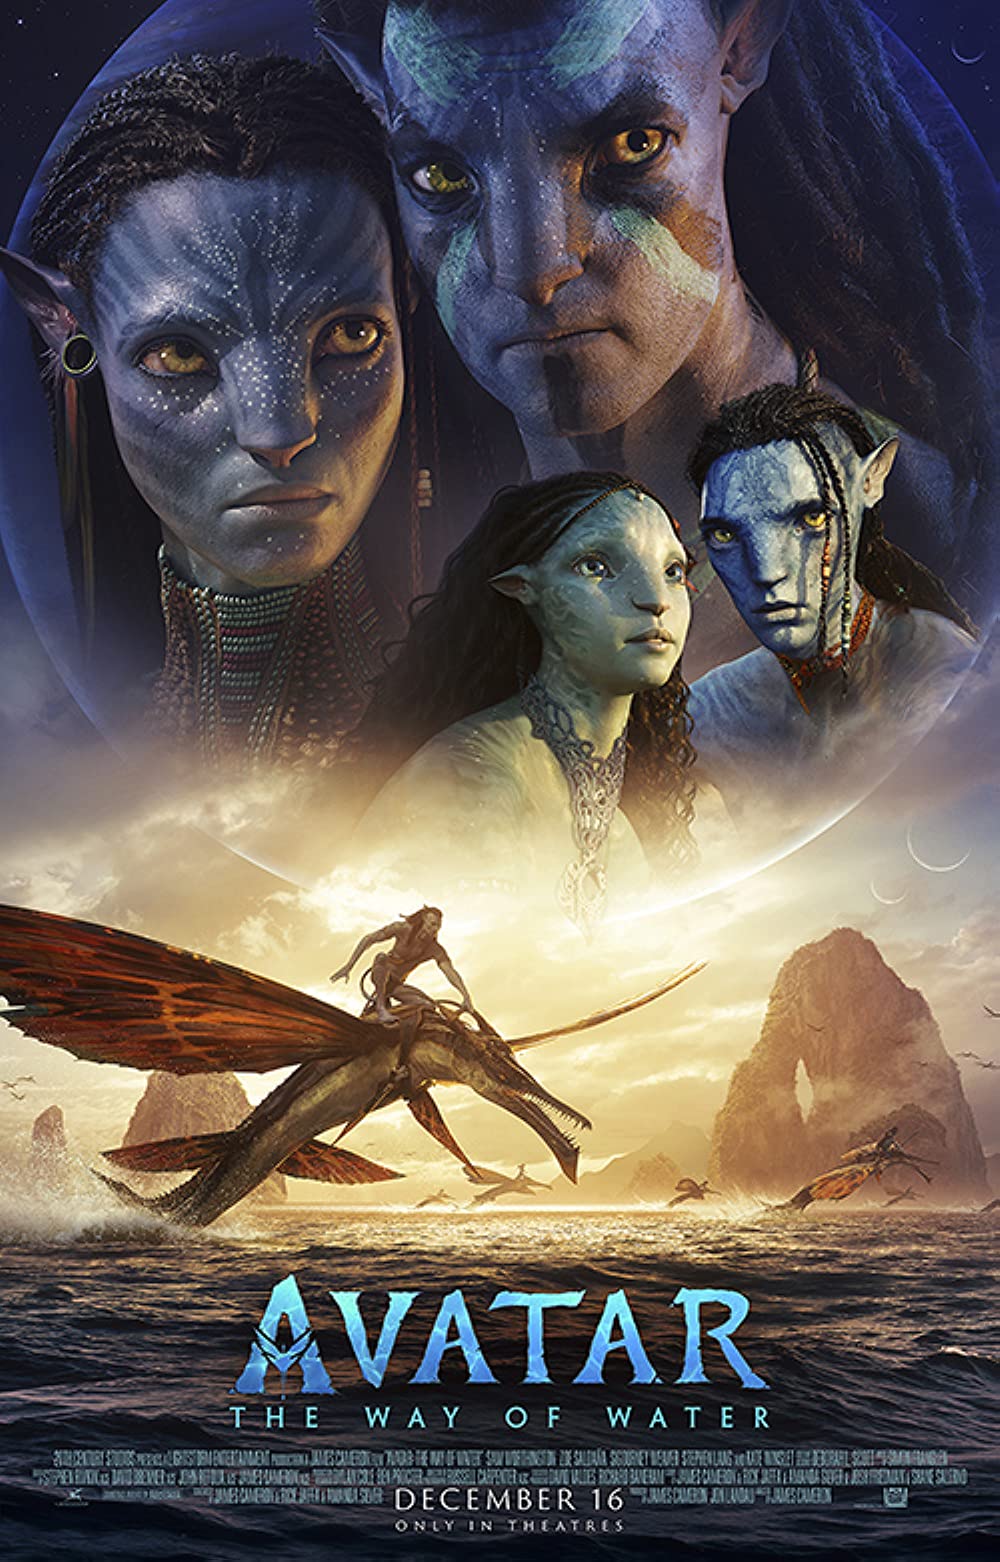 Avatar The Way of Water 2022 Hindi Dubbed Official Trailer 1080p | 720p HDRip 50MB Download